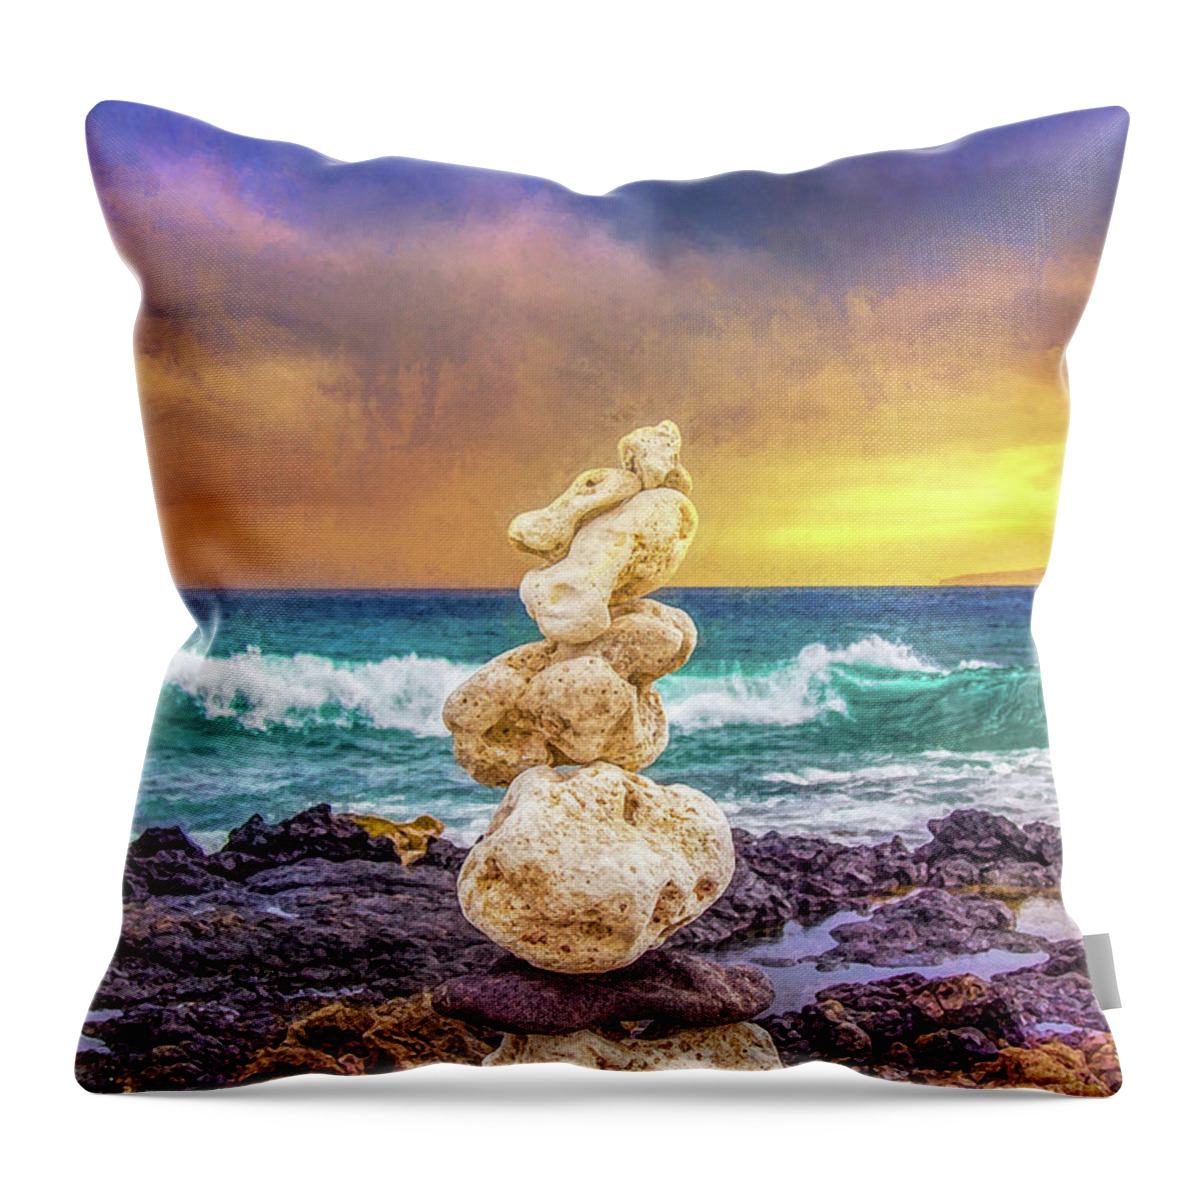 Dramatic Throw Pillow featuring the digital art Finding Balance by Cindy Collier Harris